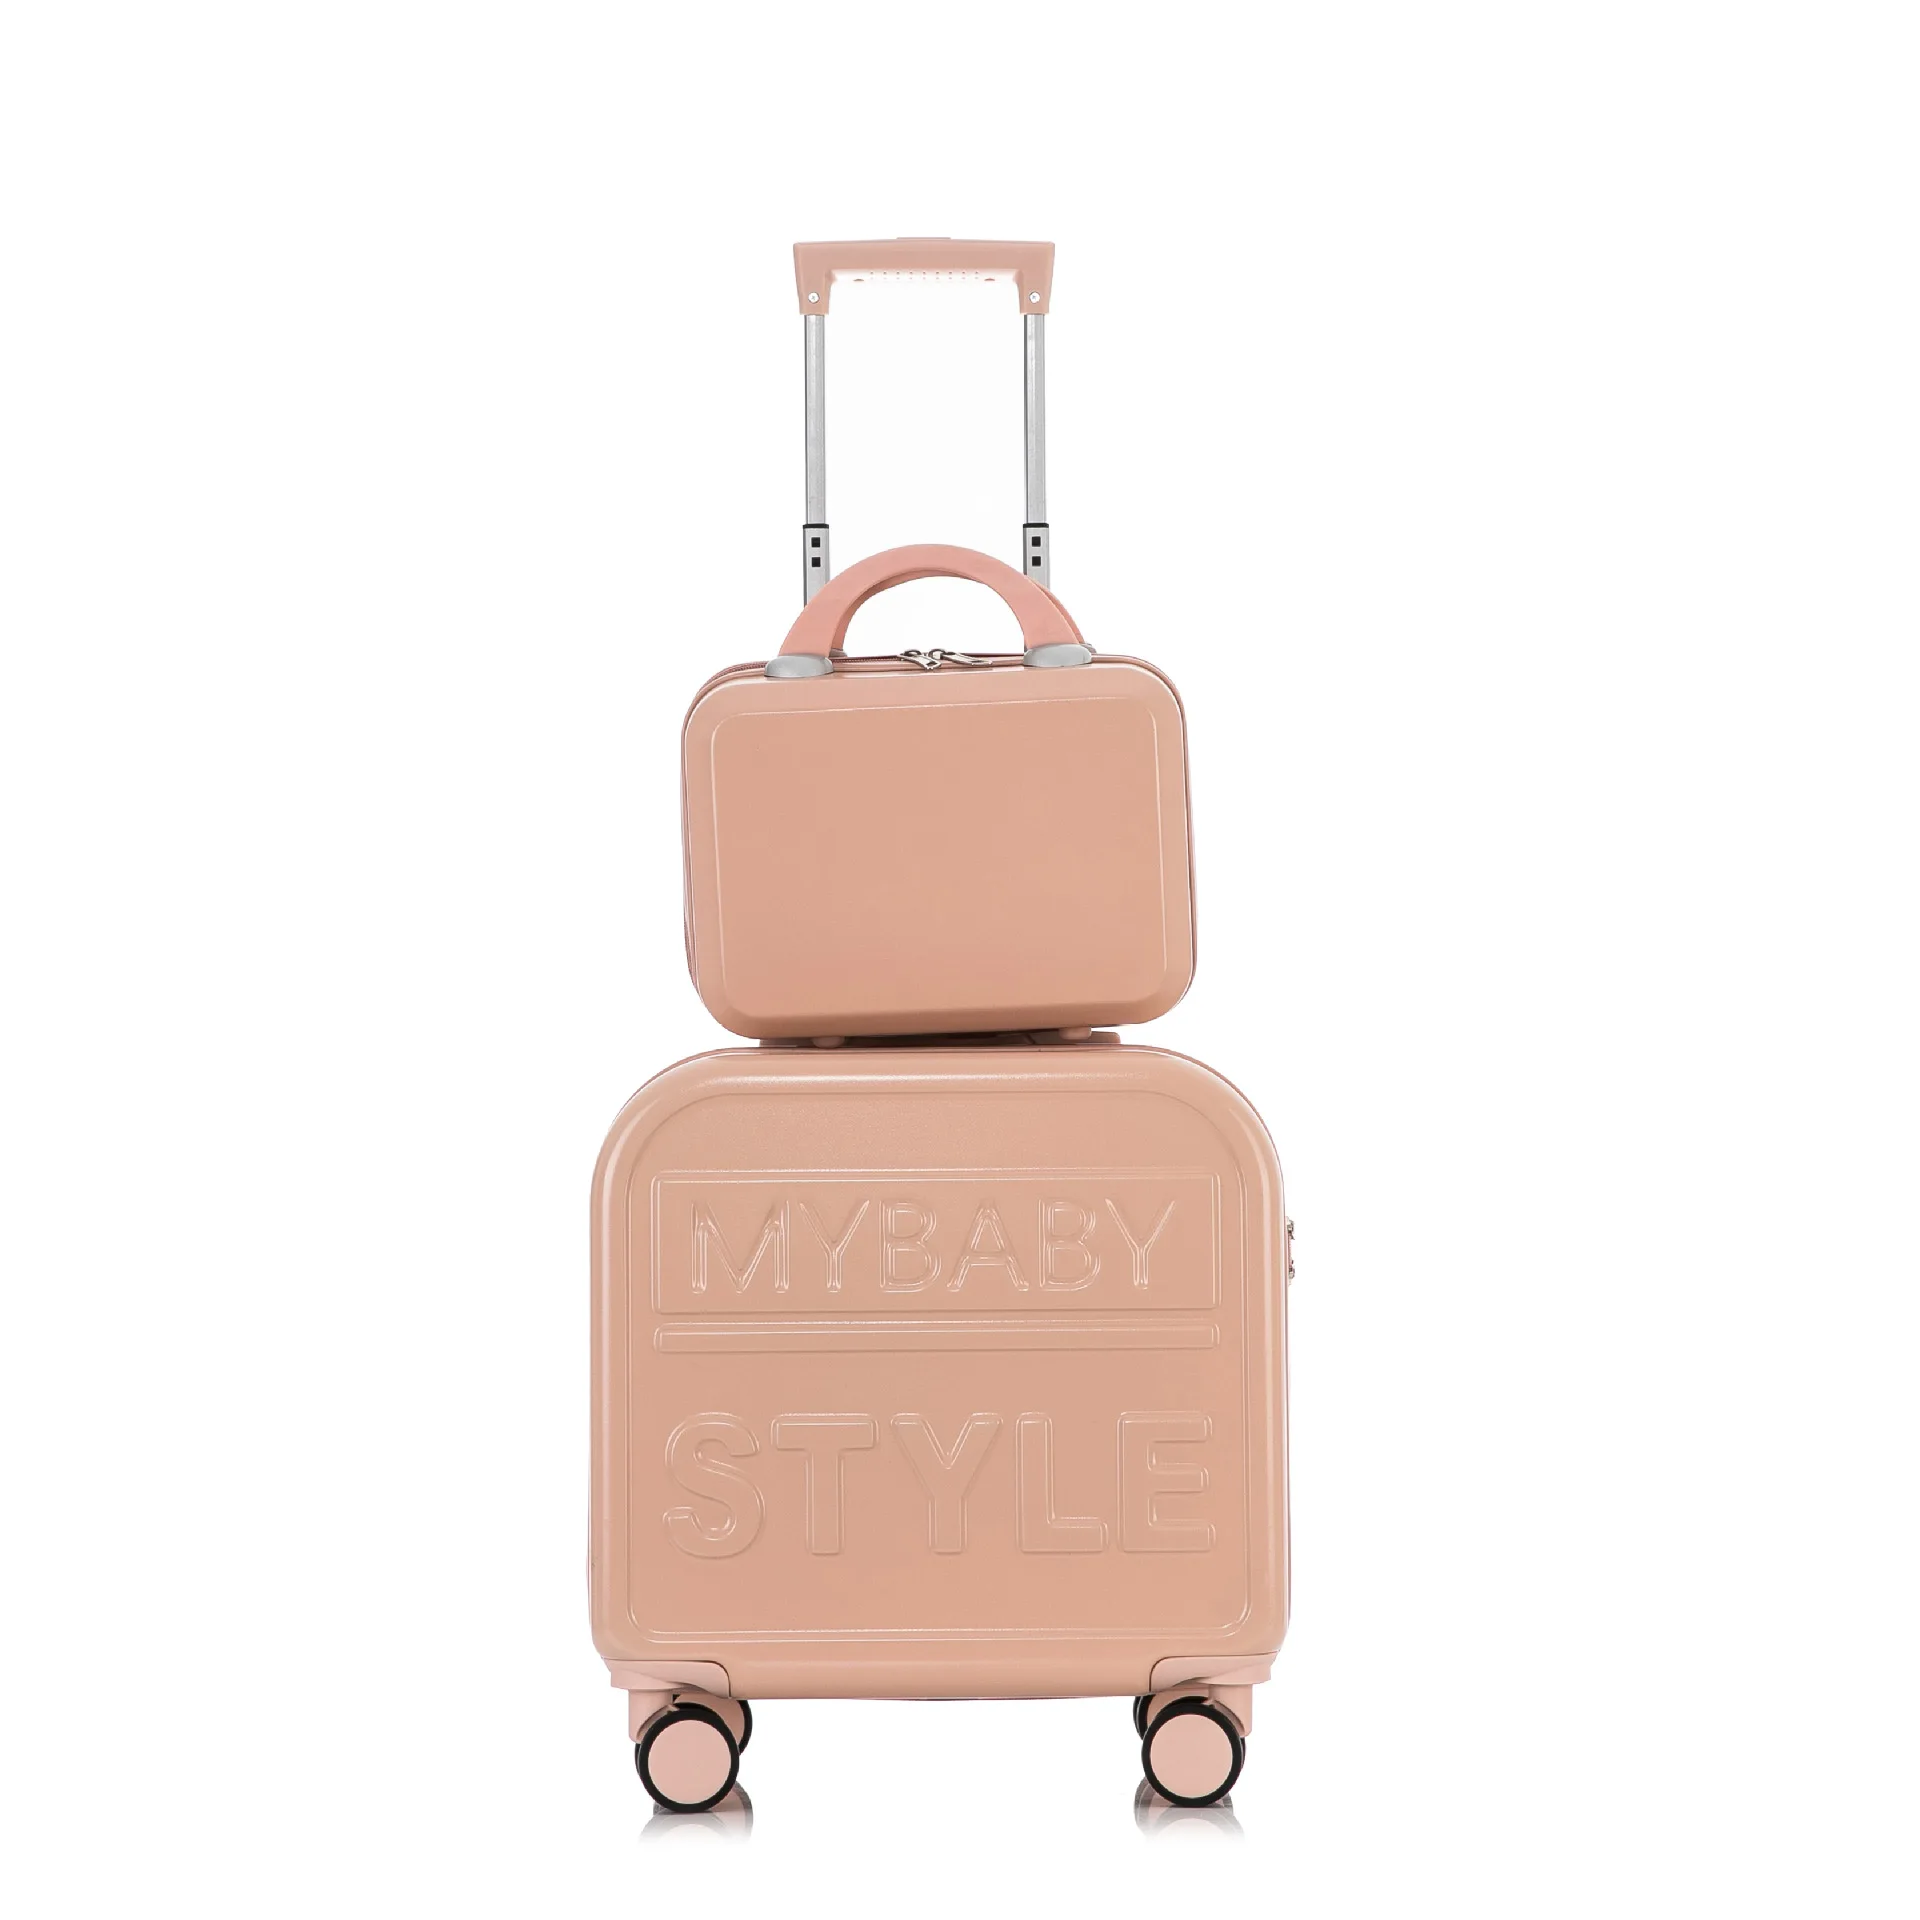 Candy Color Sweet Brand Designer Suitcase Women Carry On Luggage Trolley Case PC Rolling Spinner Wheels TSA Lock Free Cover